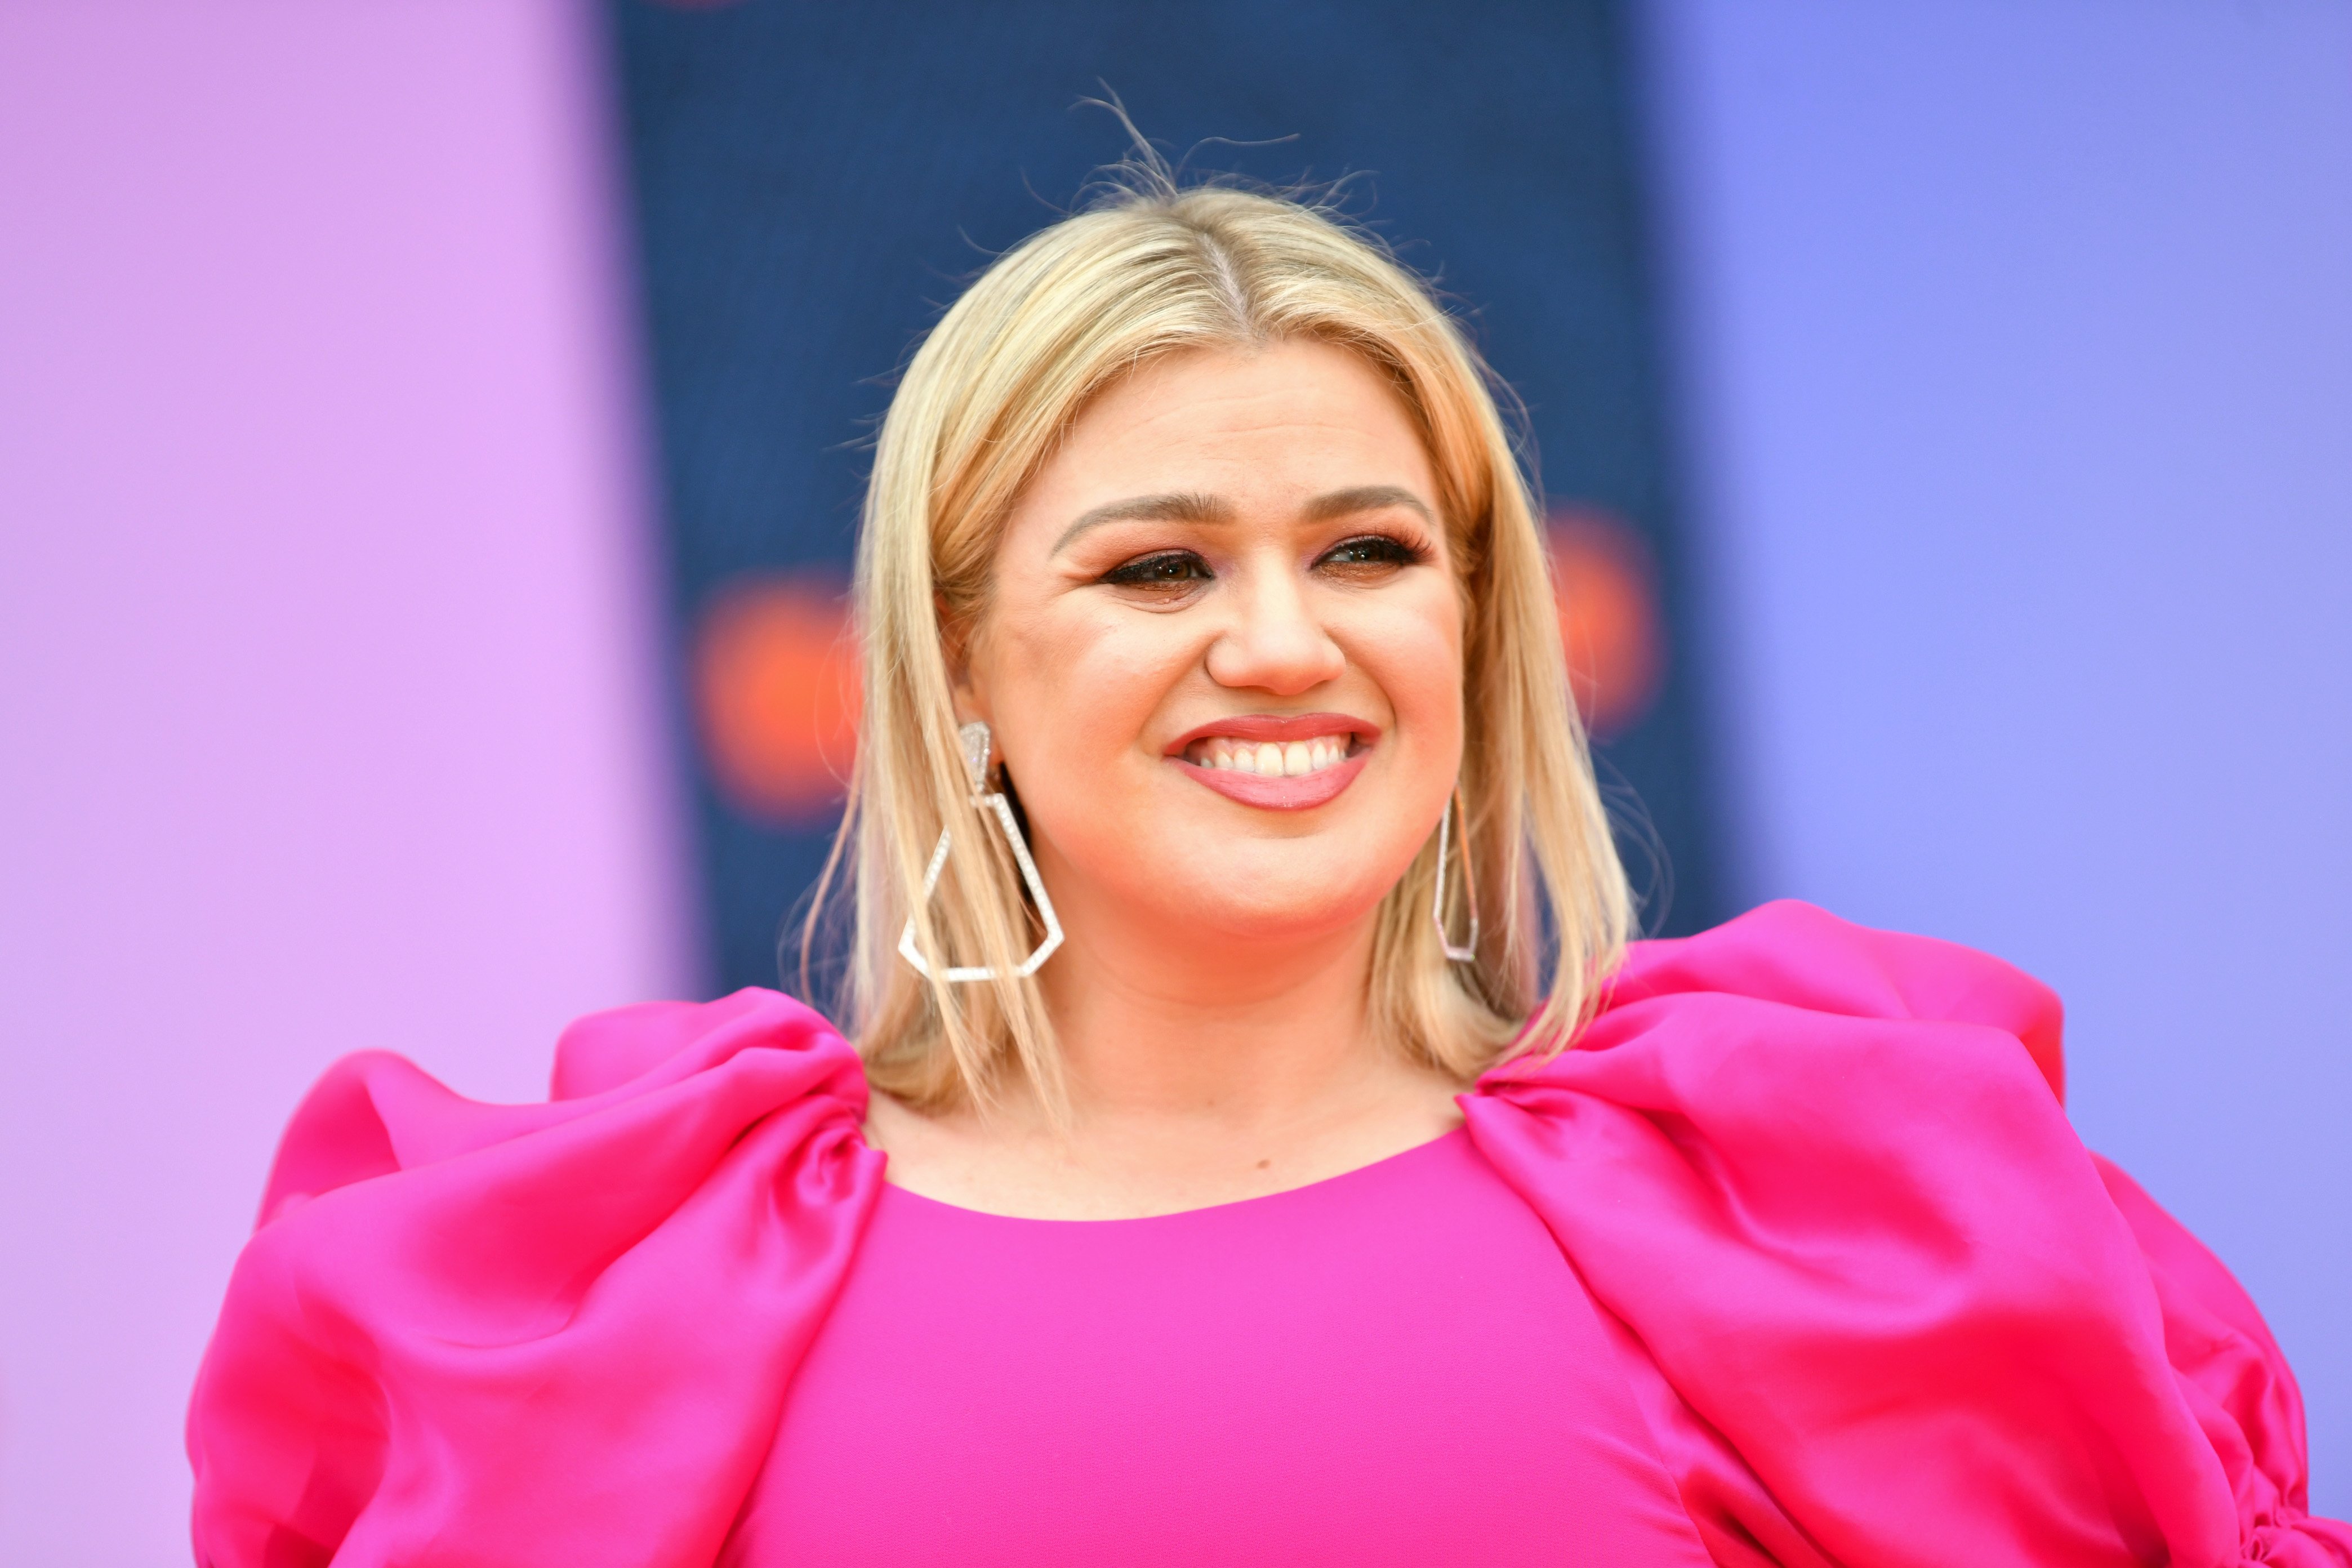 Kelly Clarkson attends STX Films World Premiere of "UglyDolls" on April 27, 2019, in Los Angeles, California. | Source: Getty Images.